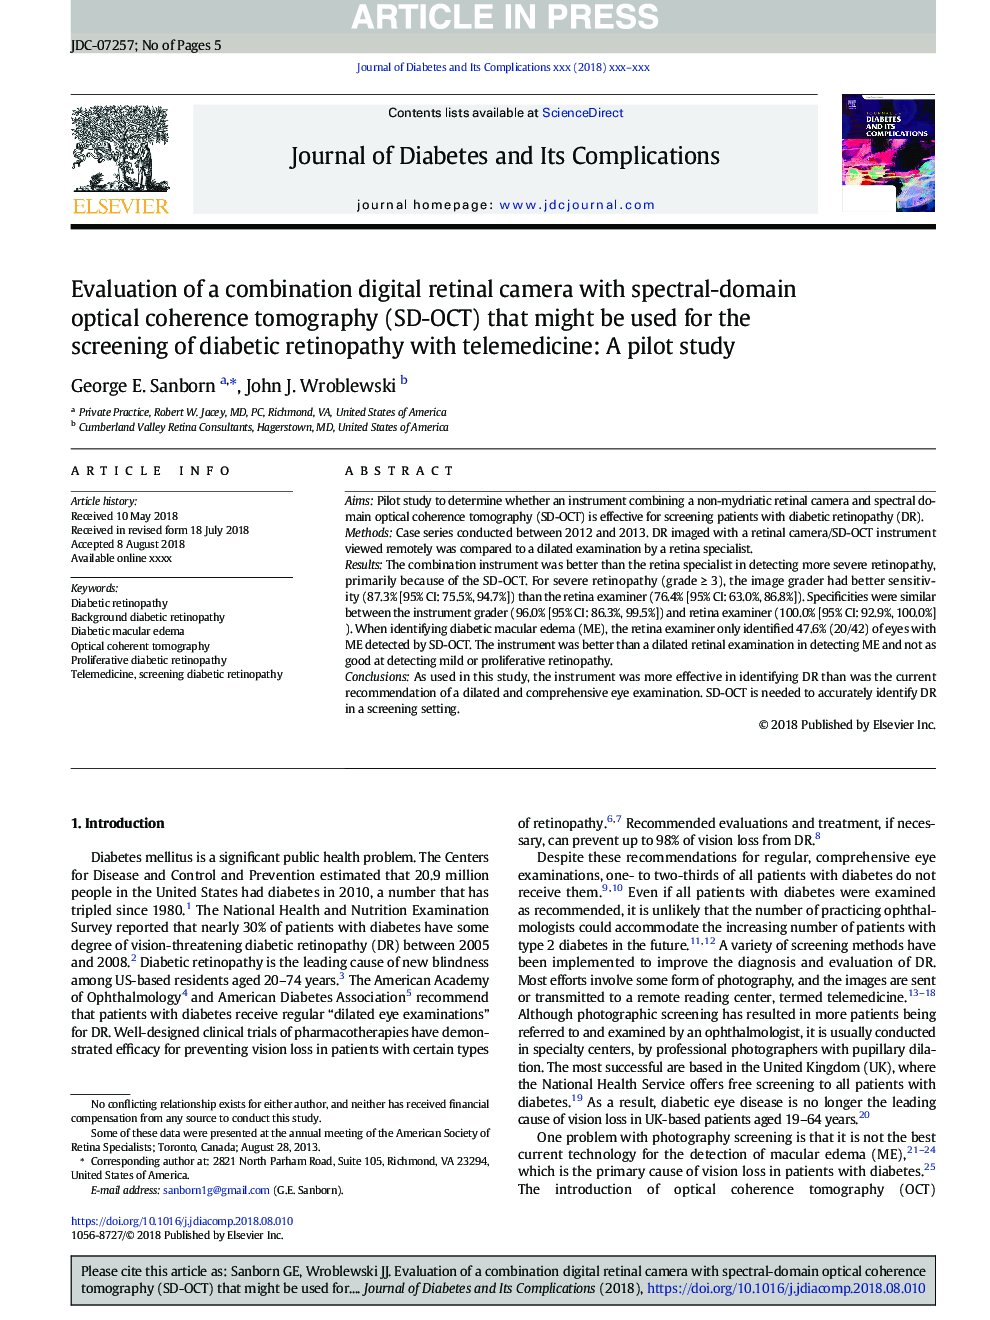 Evaluation of a combination digital retinal camera with spectral-domain optical coherence tomography (SD-OCT) that might be used for the screening of diabetic retinopathy with telemedicine: A pilot study